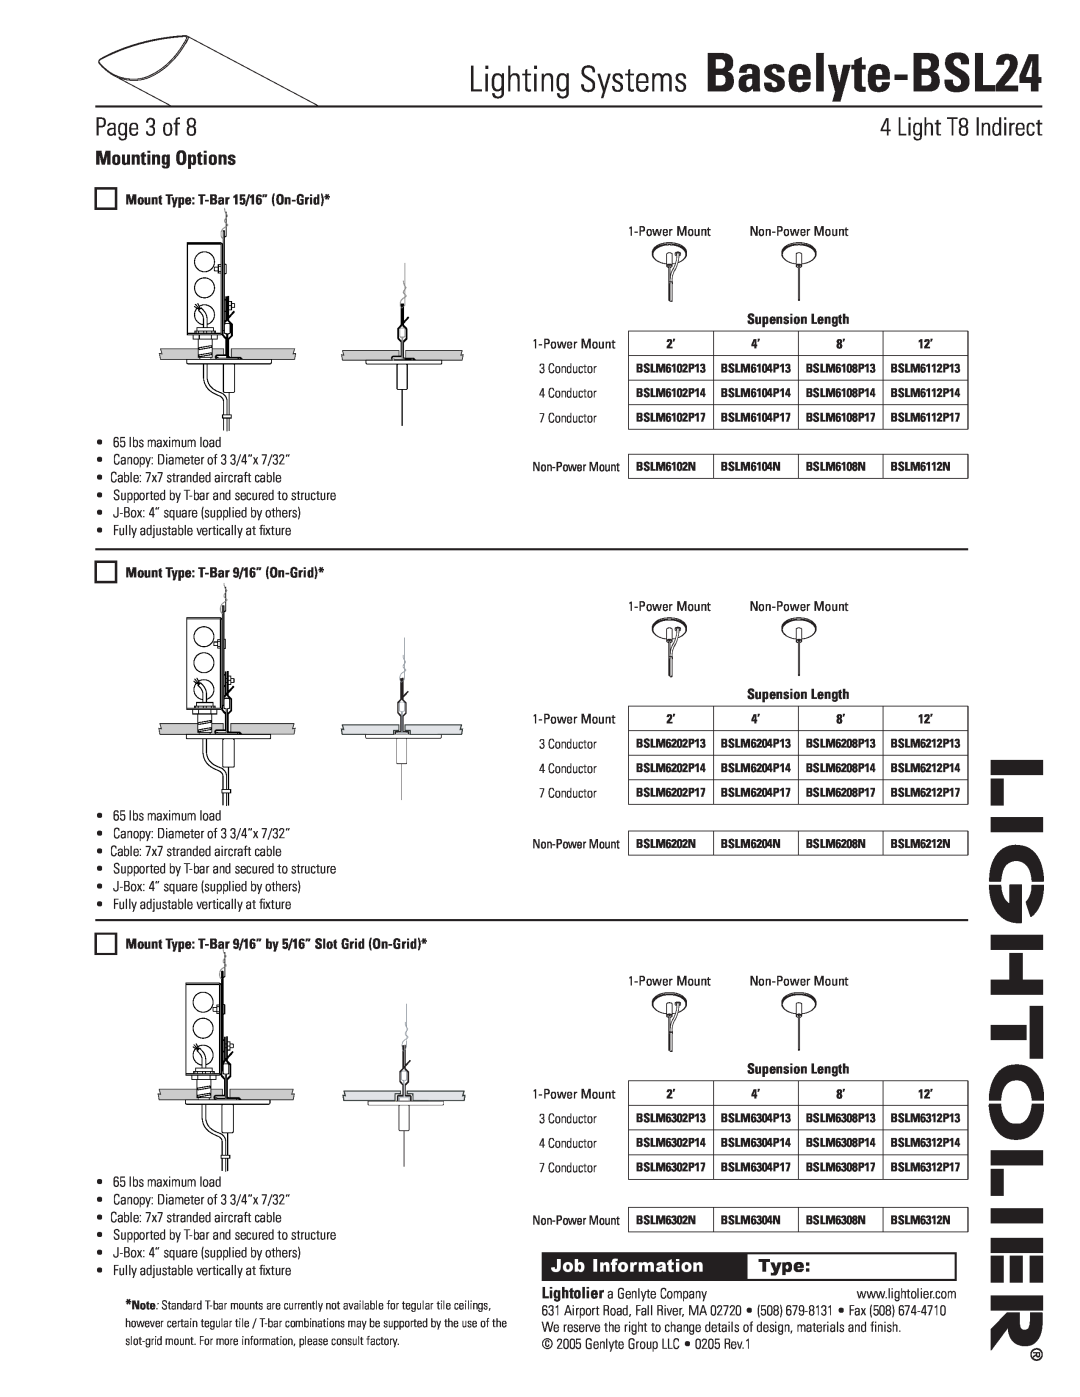 Lightolier Baselyte-BSL24 Mounting Options, Mount Type T-Bar15/16” On-Grid, Supension Length, Page of, Light T8 Indirect 